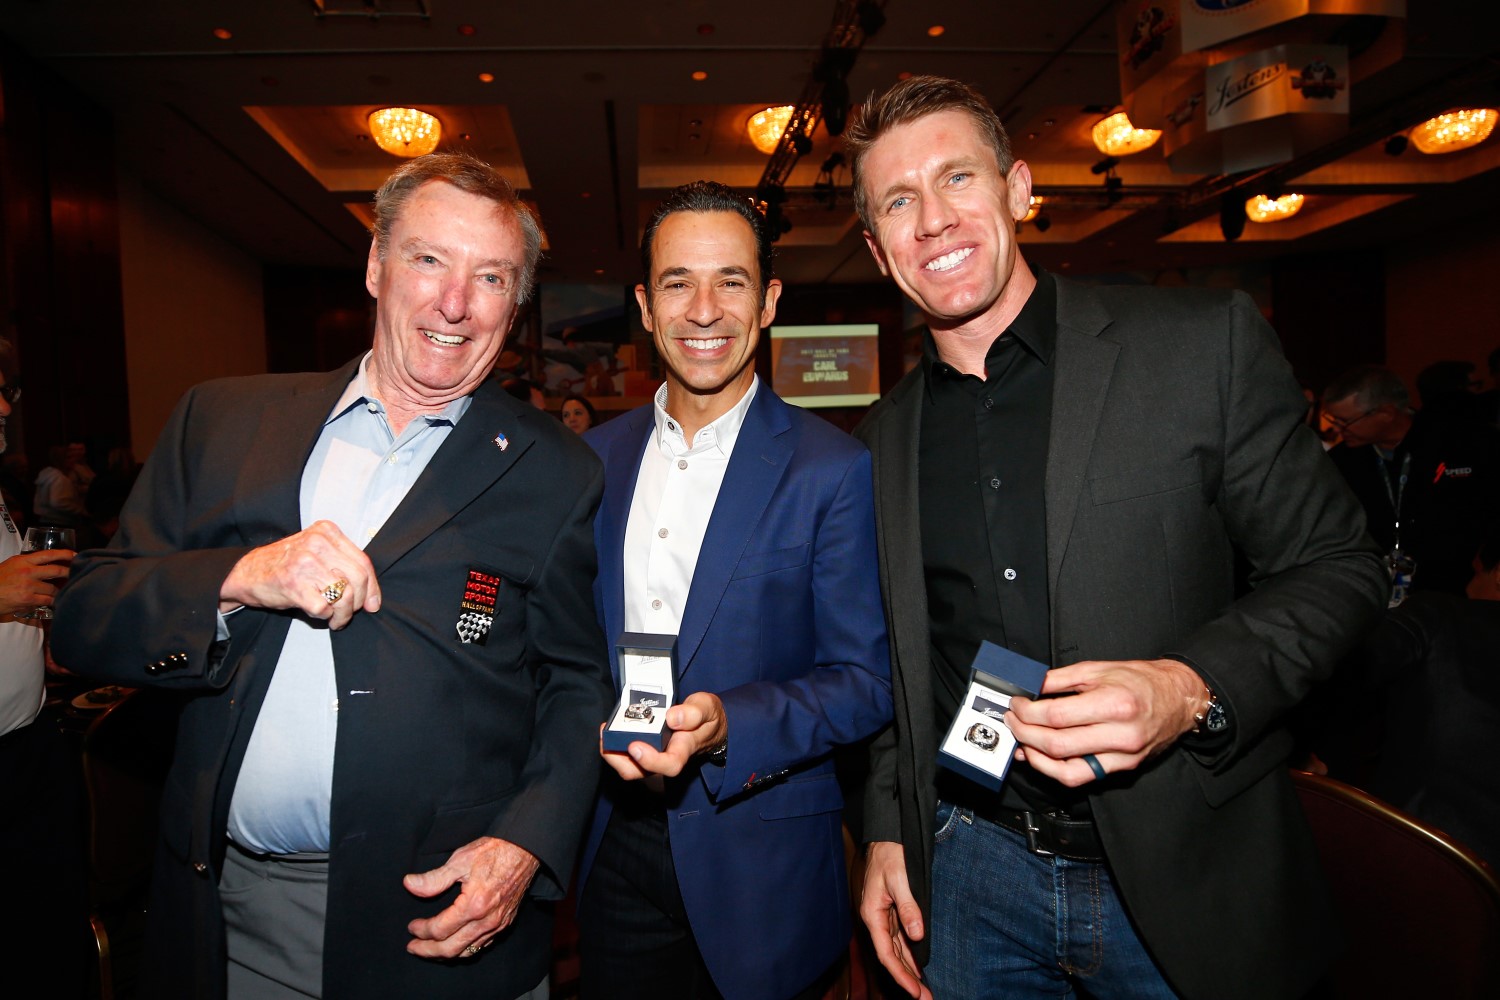 Johnny Rutherford, Helio Castroneves and Carl Edwards pose for a photo during the Texas Motorsports Hall of Fame ceremony